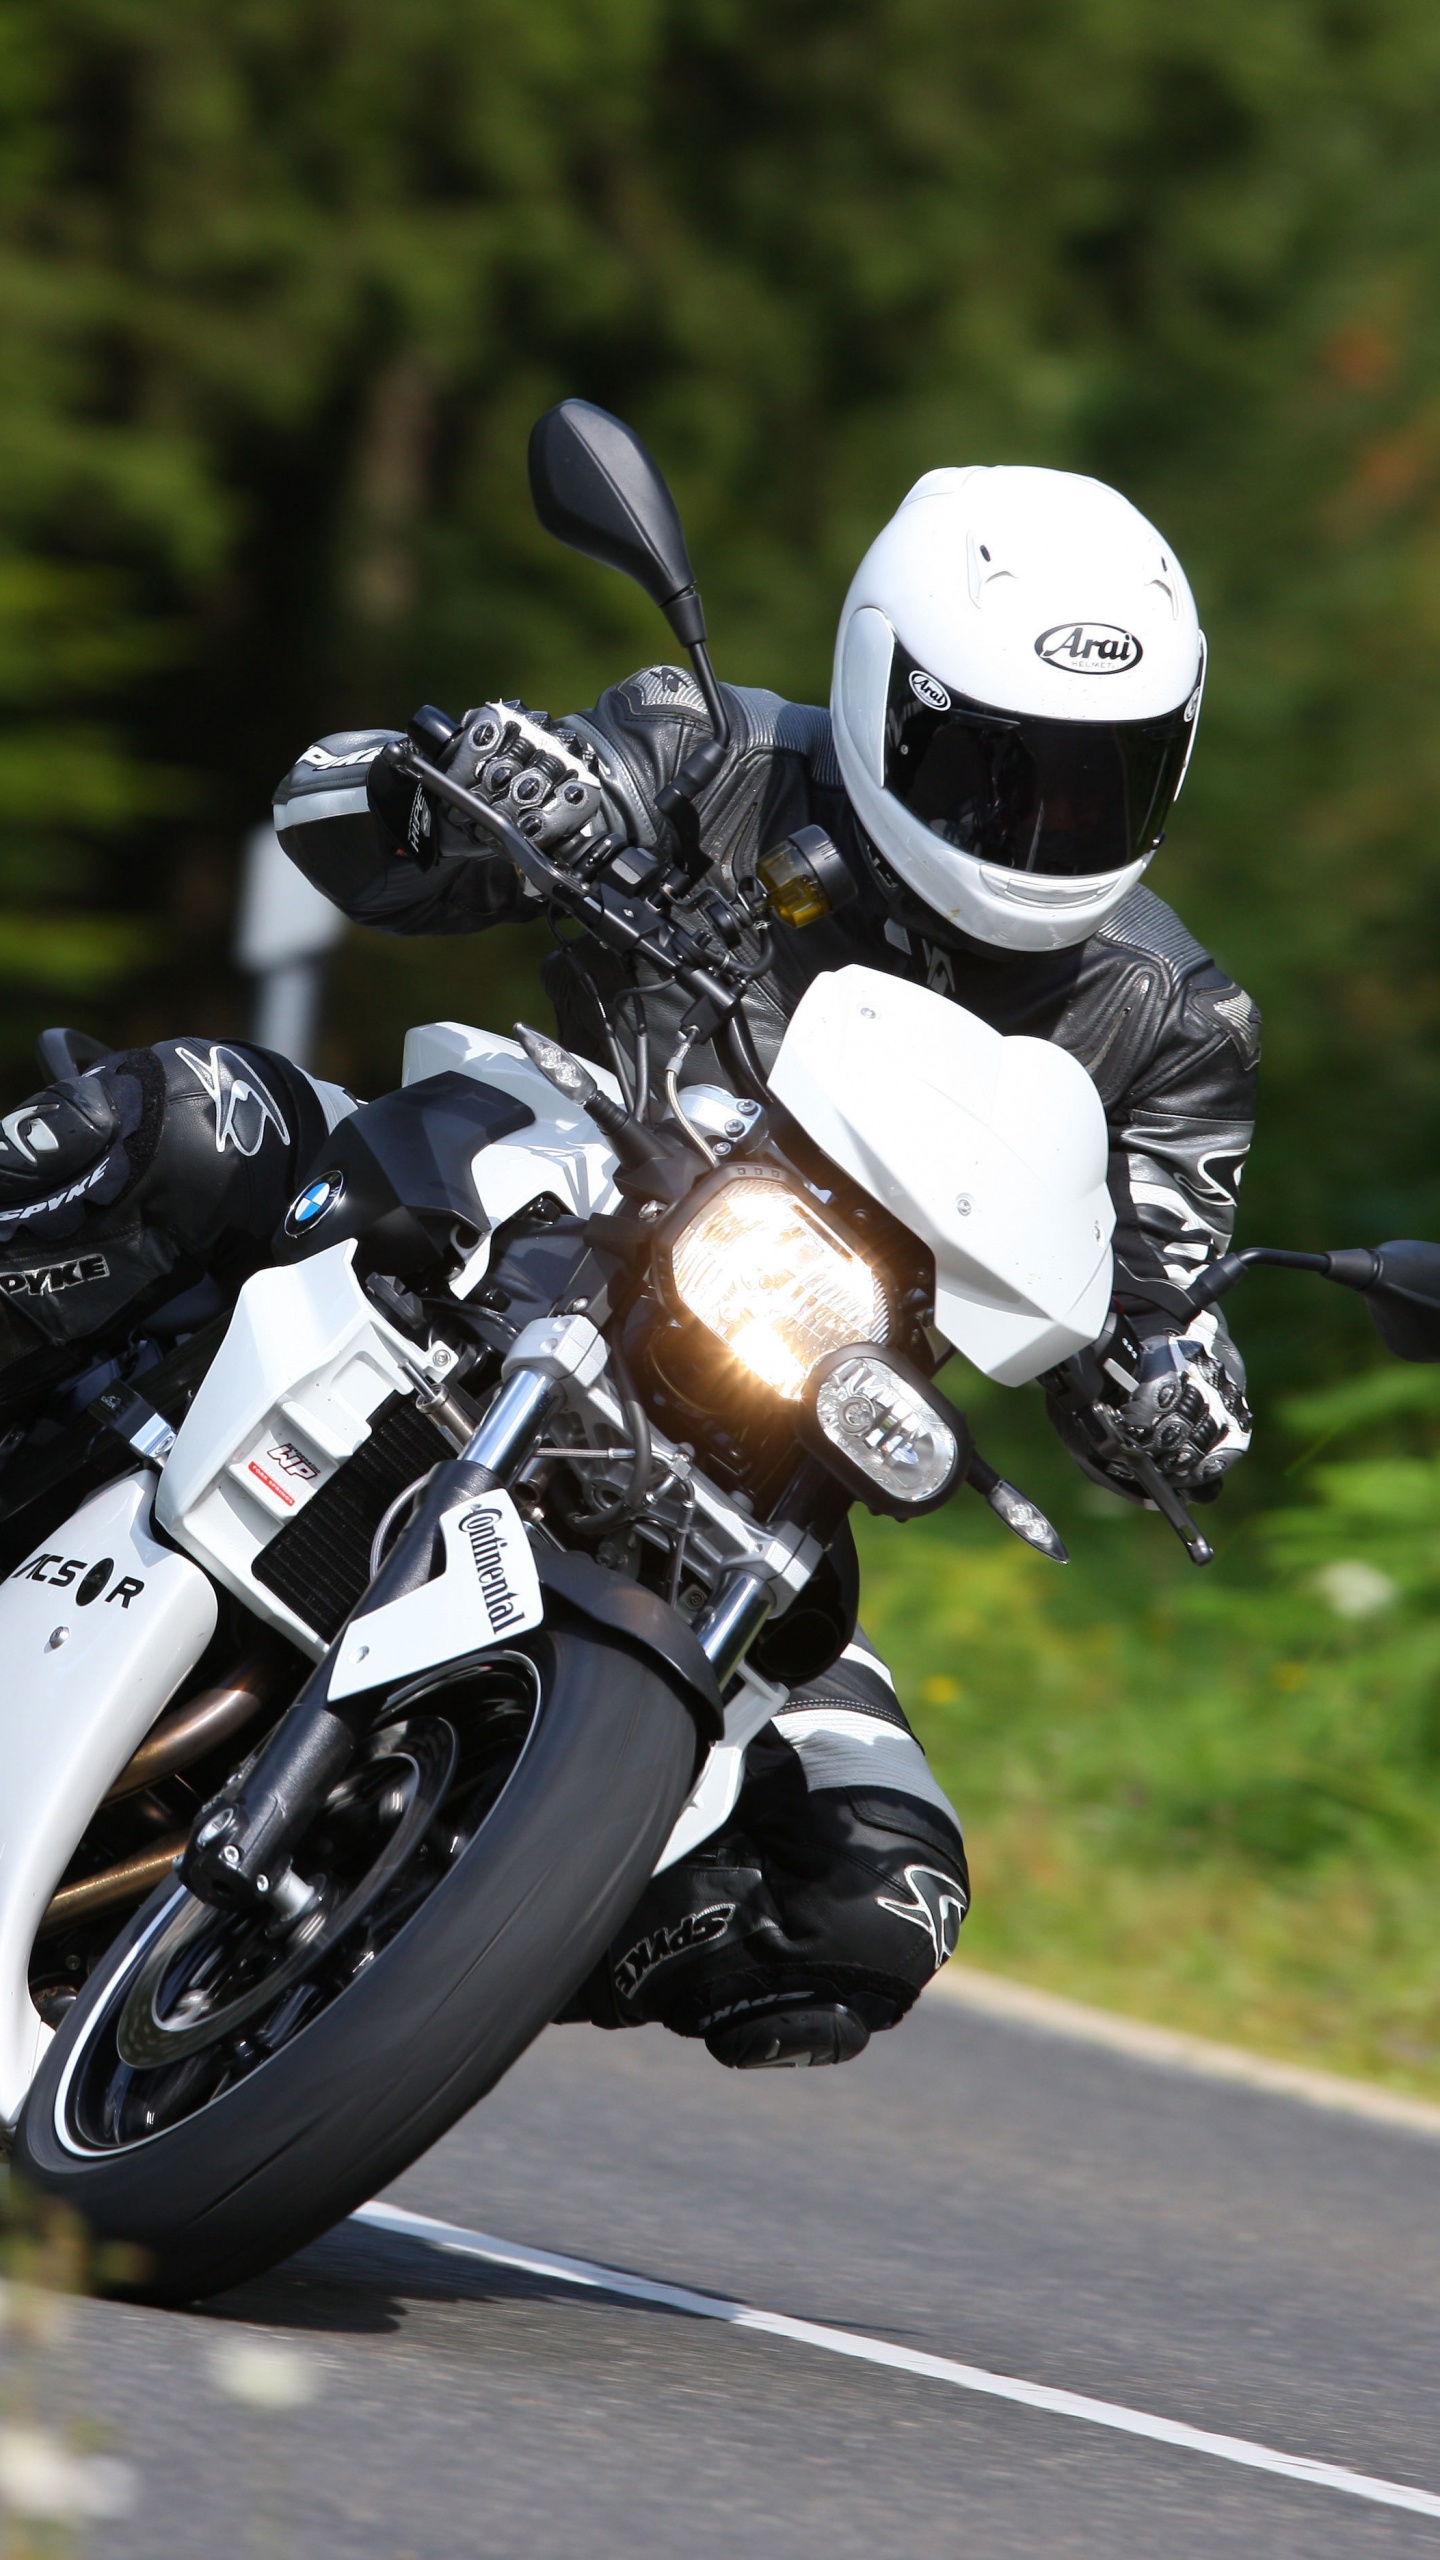 Man in Black Helmet Riding Motorcycle on Road During Daytime. Wallpaper in 1440x2560 Resolution